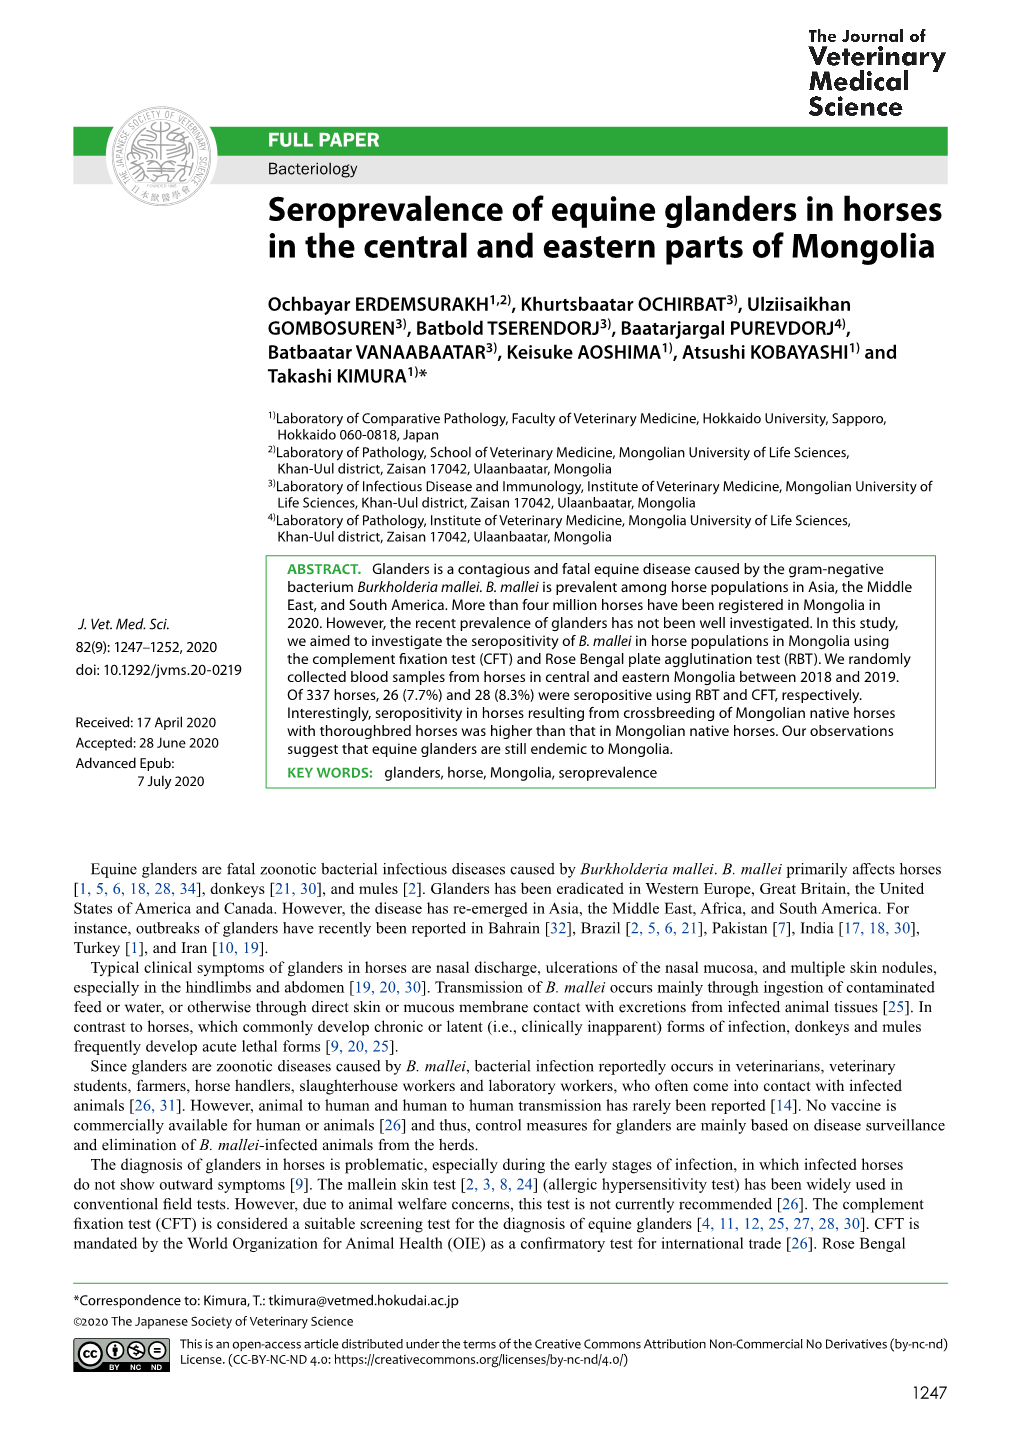 Seroprevalence of Equine Glanders in Horses in the Central and Eastern Parts of Mongolia